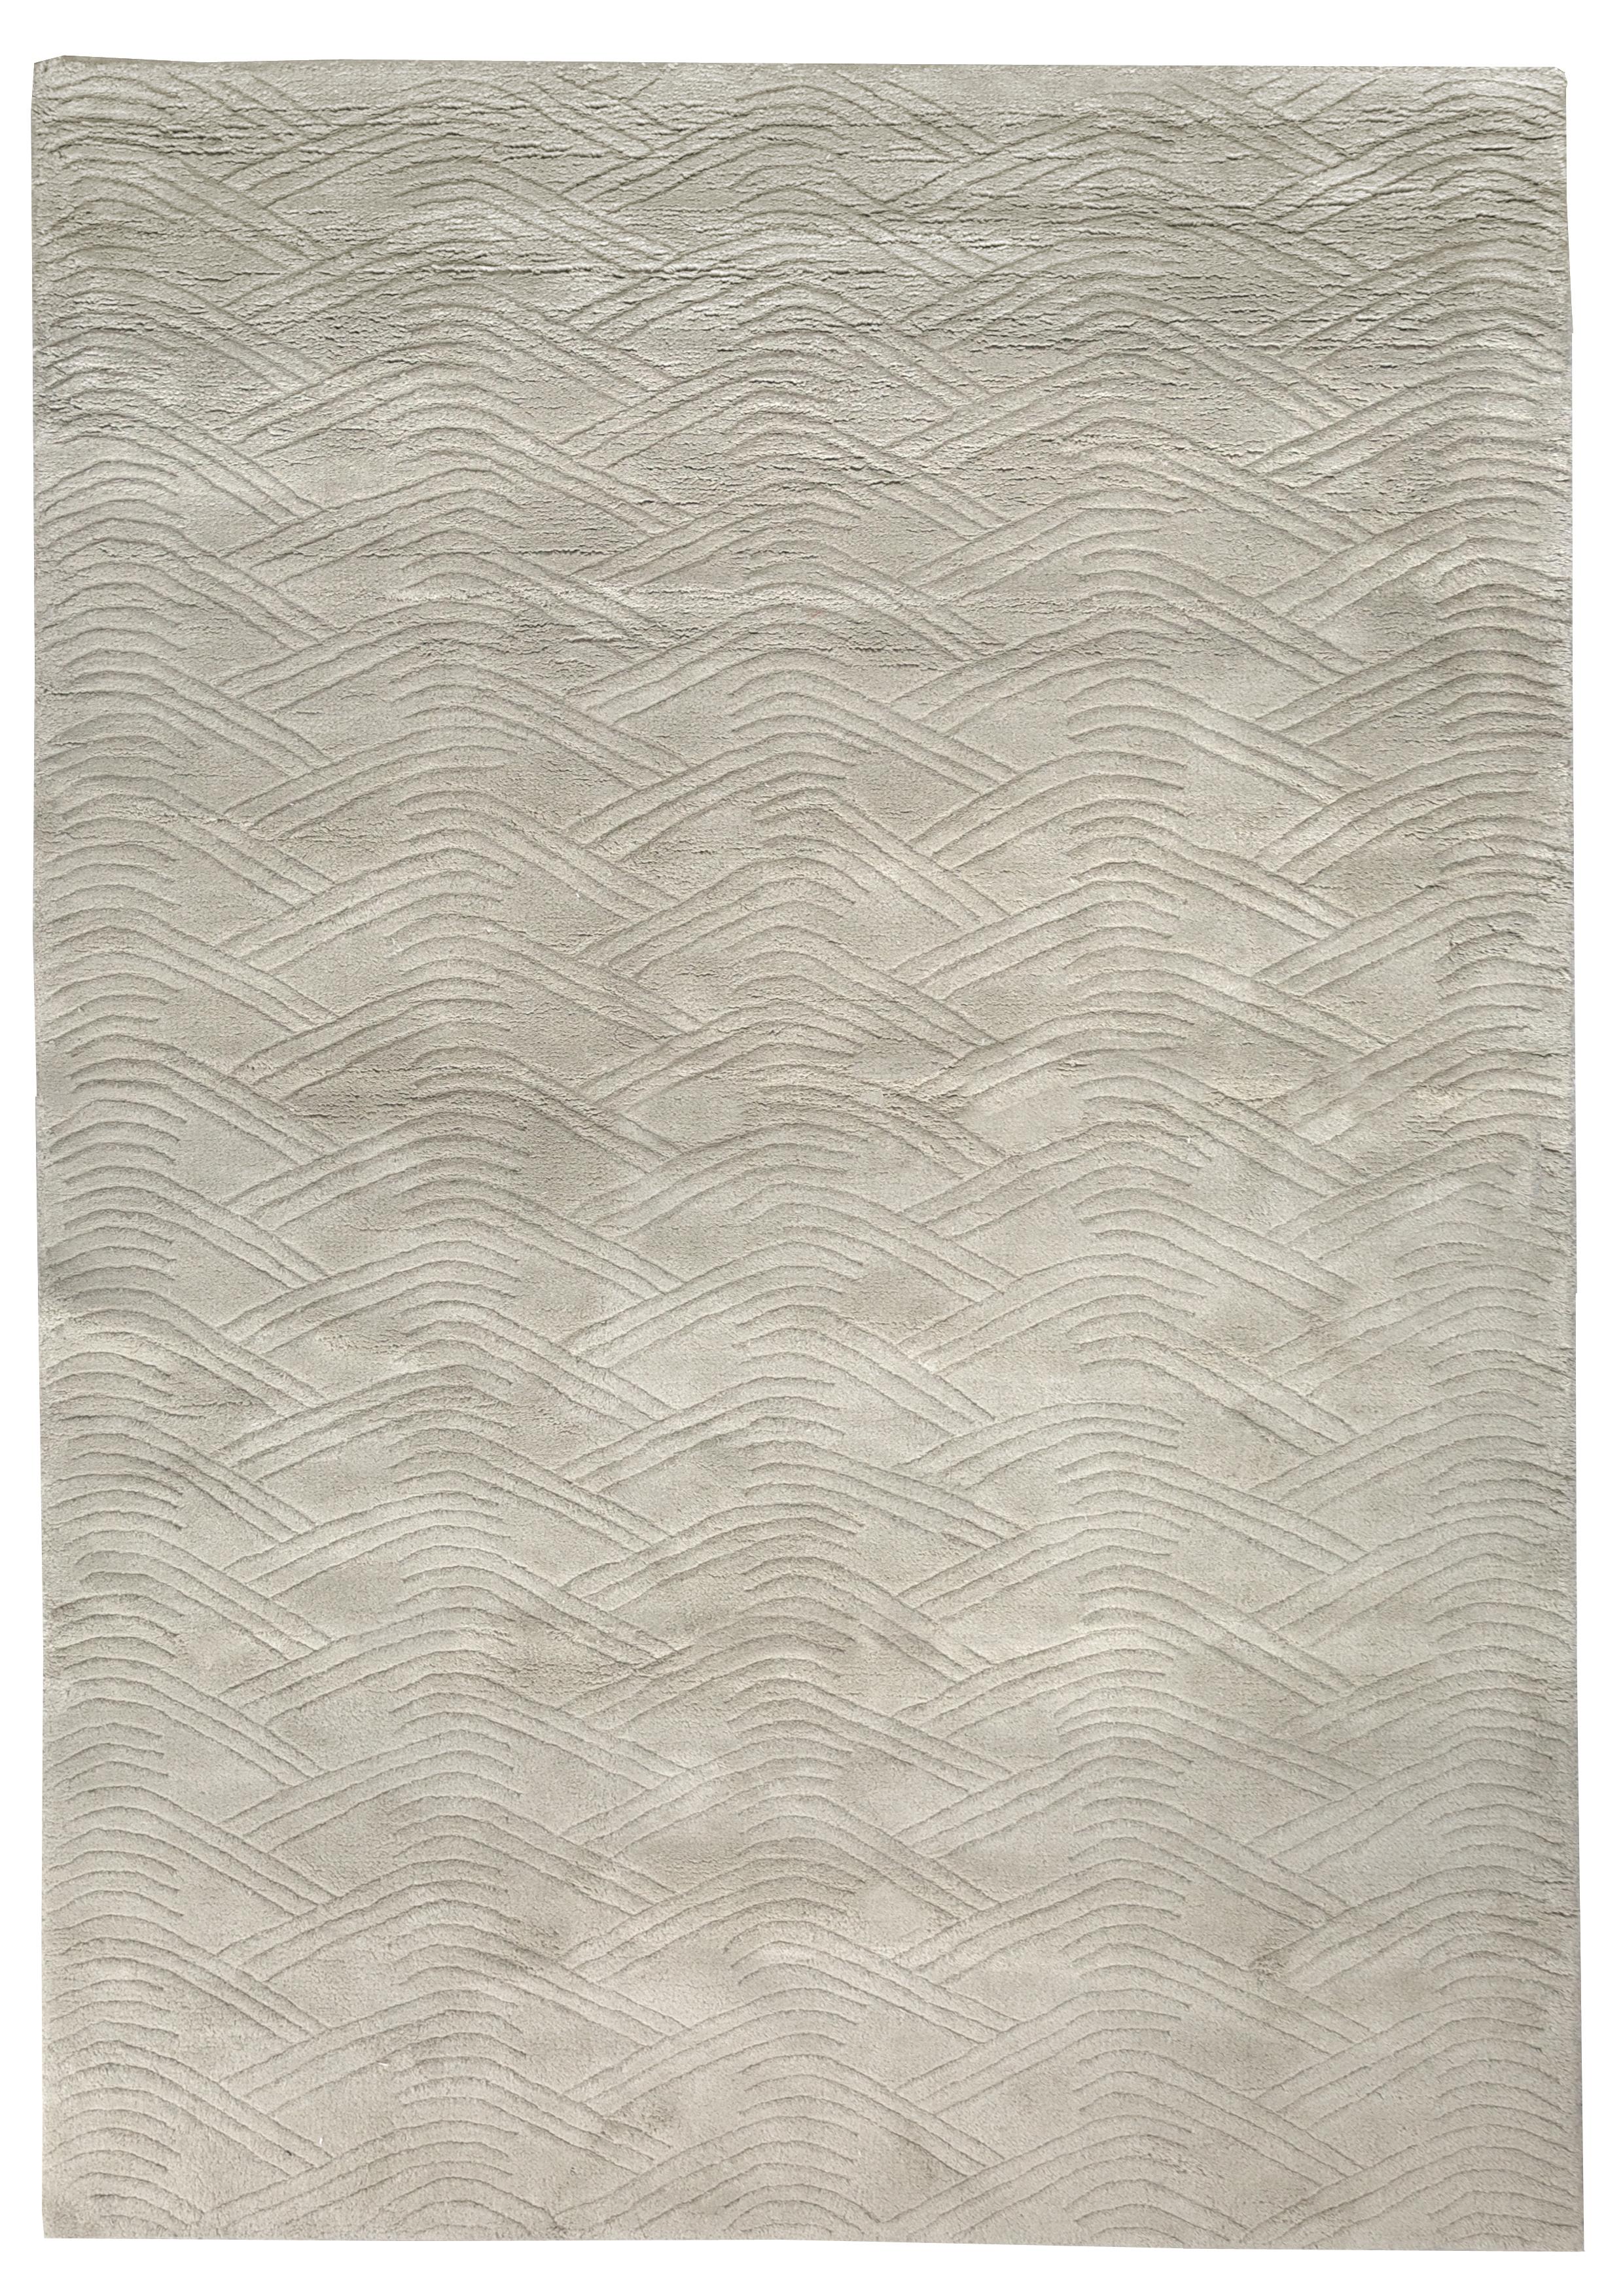 Hand-Woven Curved Line Pattern Customizable Voyage Weave Rug in Dove Small For Sale